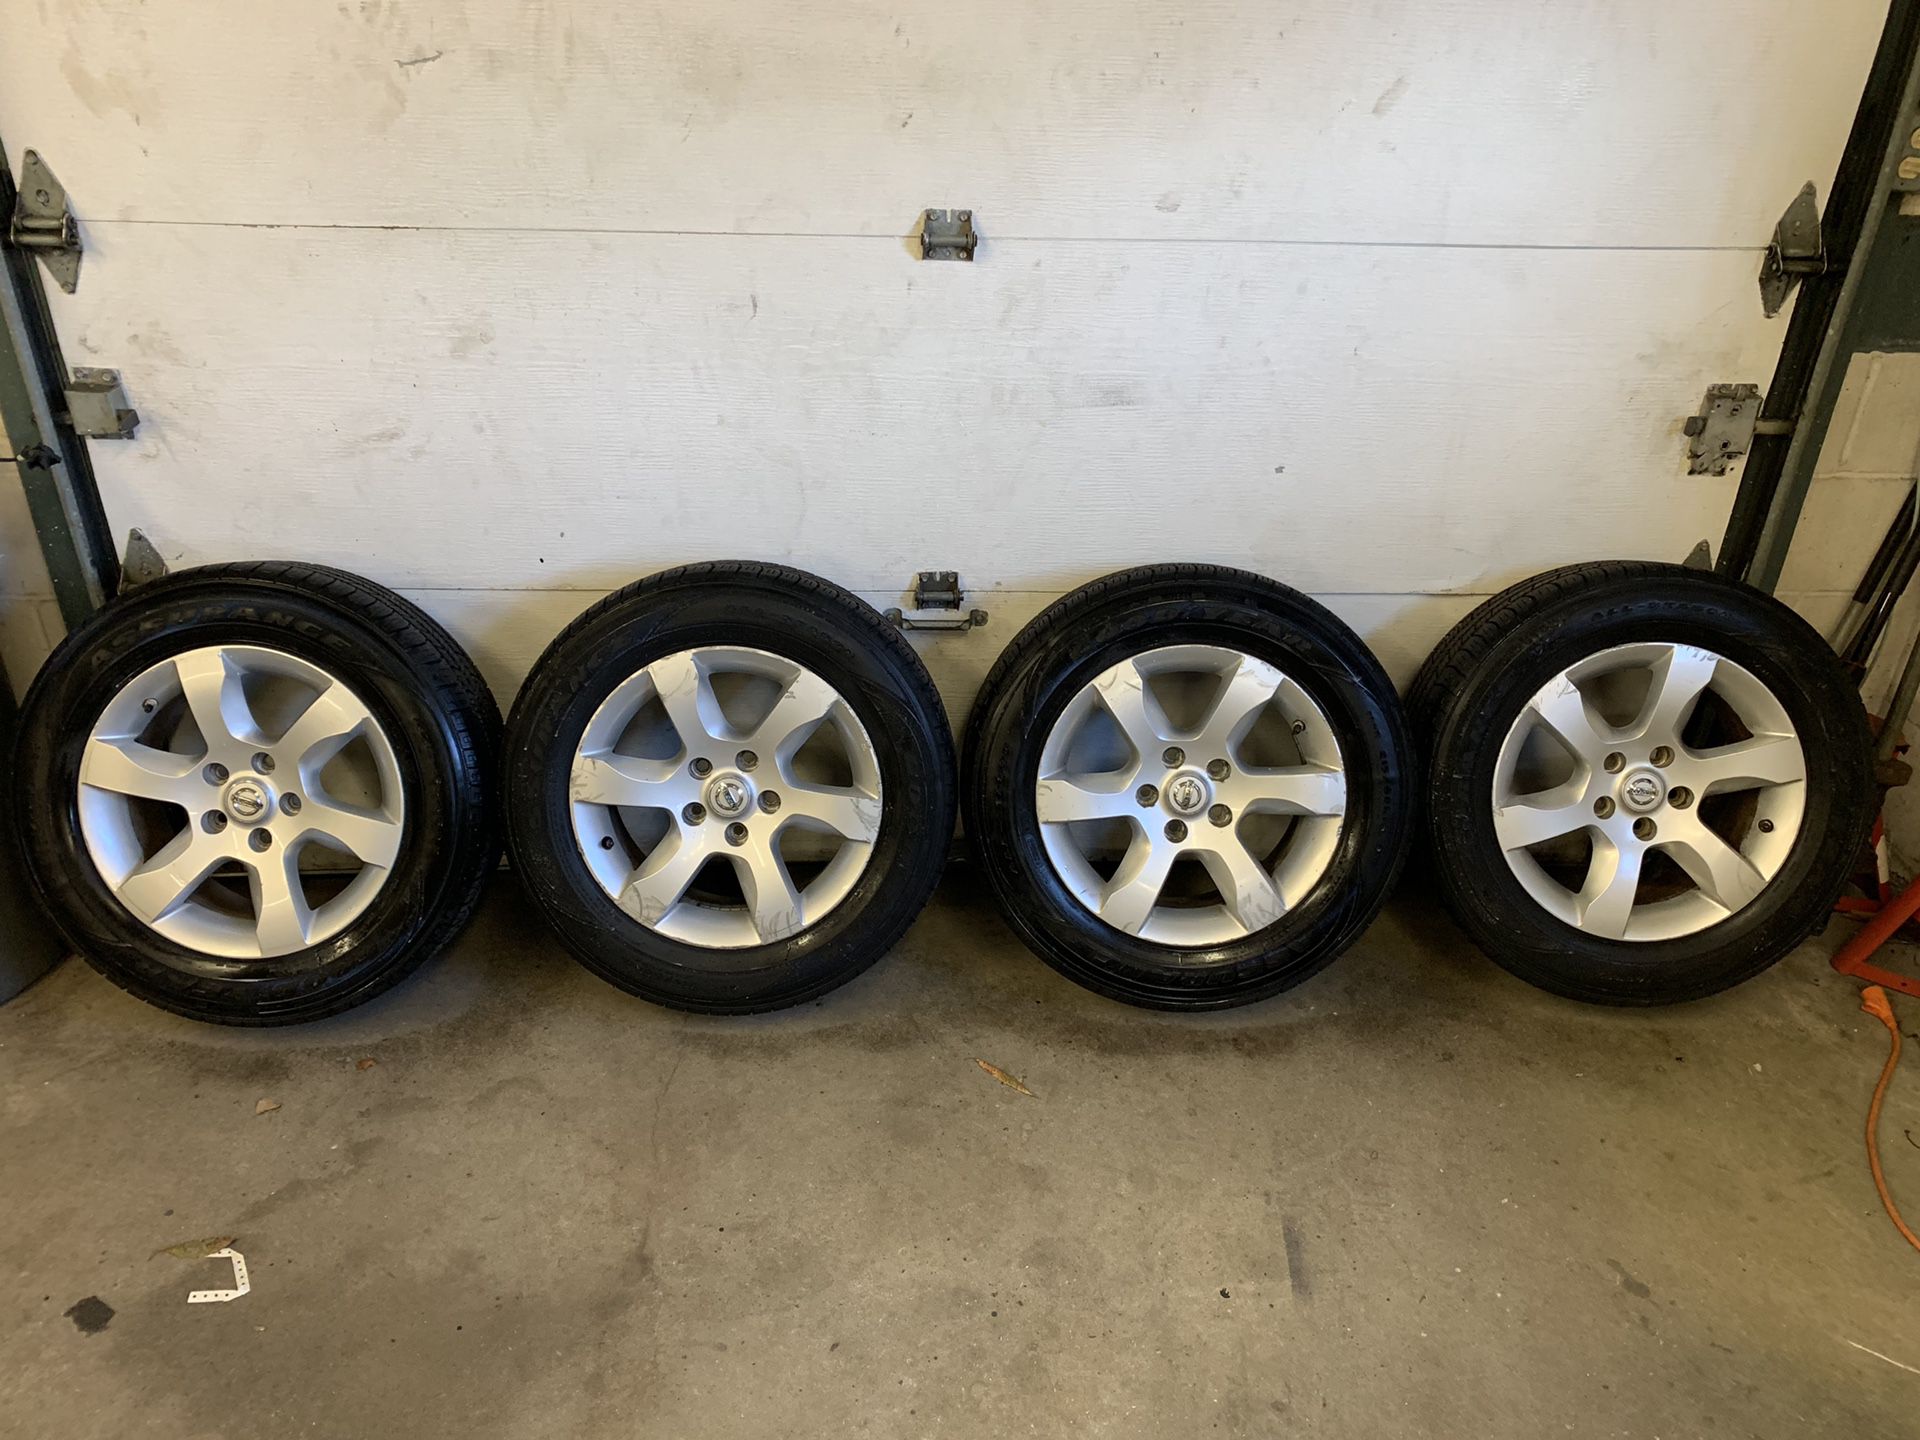 07-12 Nissan Altima OEM 16 inch wheels and matching tires 95%